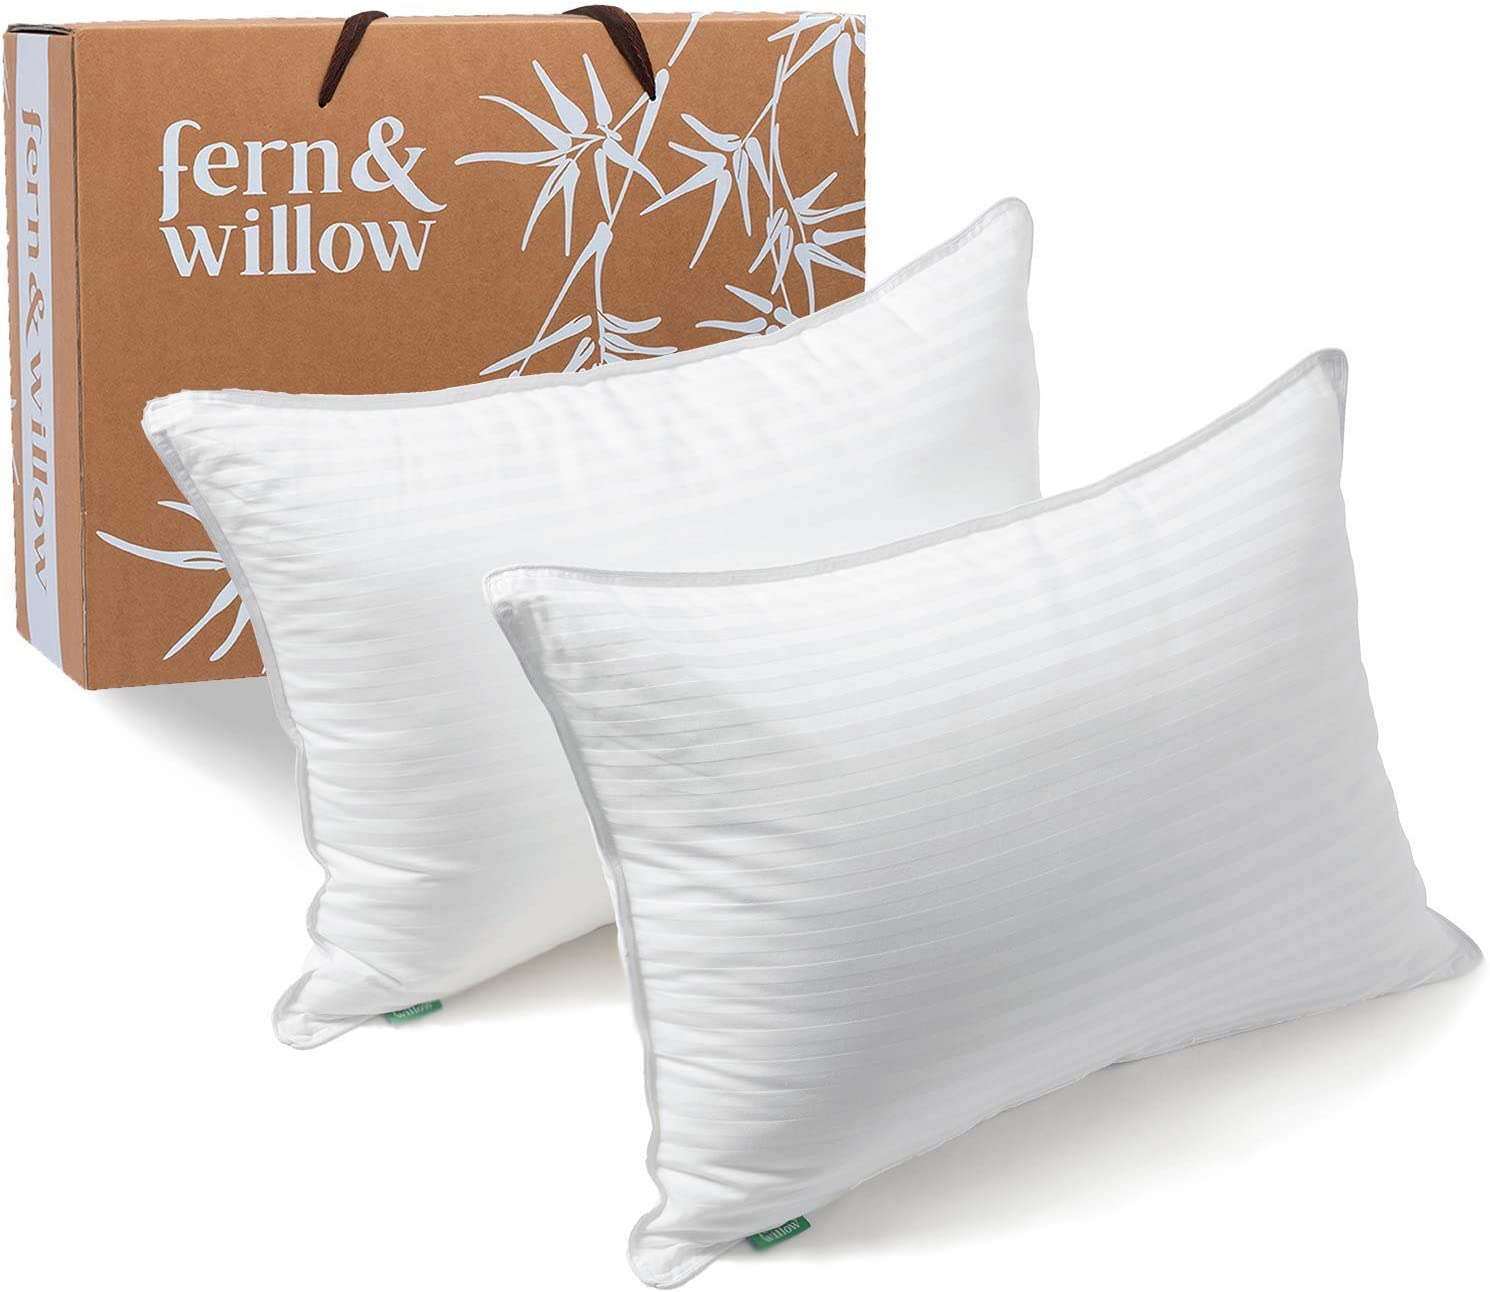 Fern & Willow Machine Washable Allergy-Friendly Gel Pillows, 2-Pack